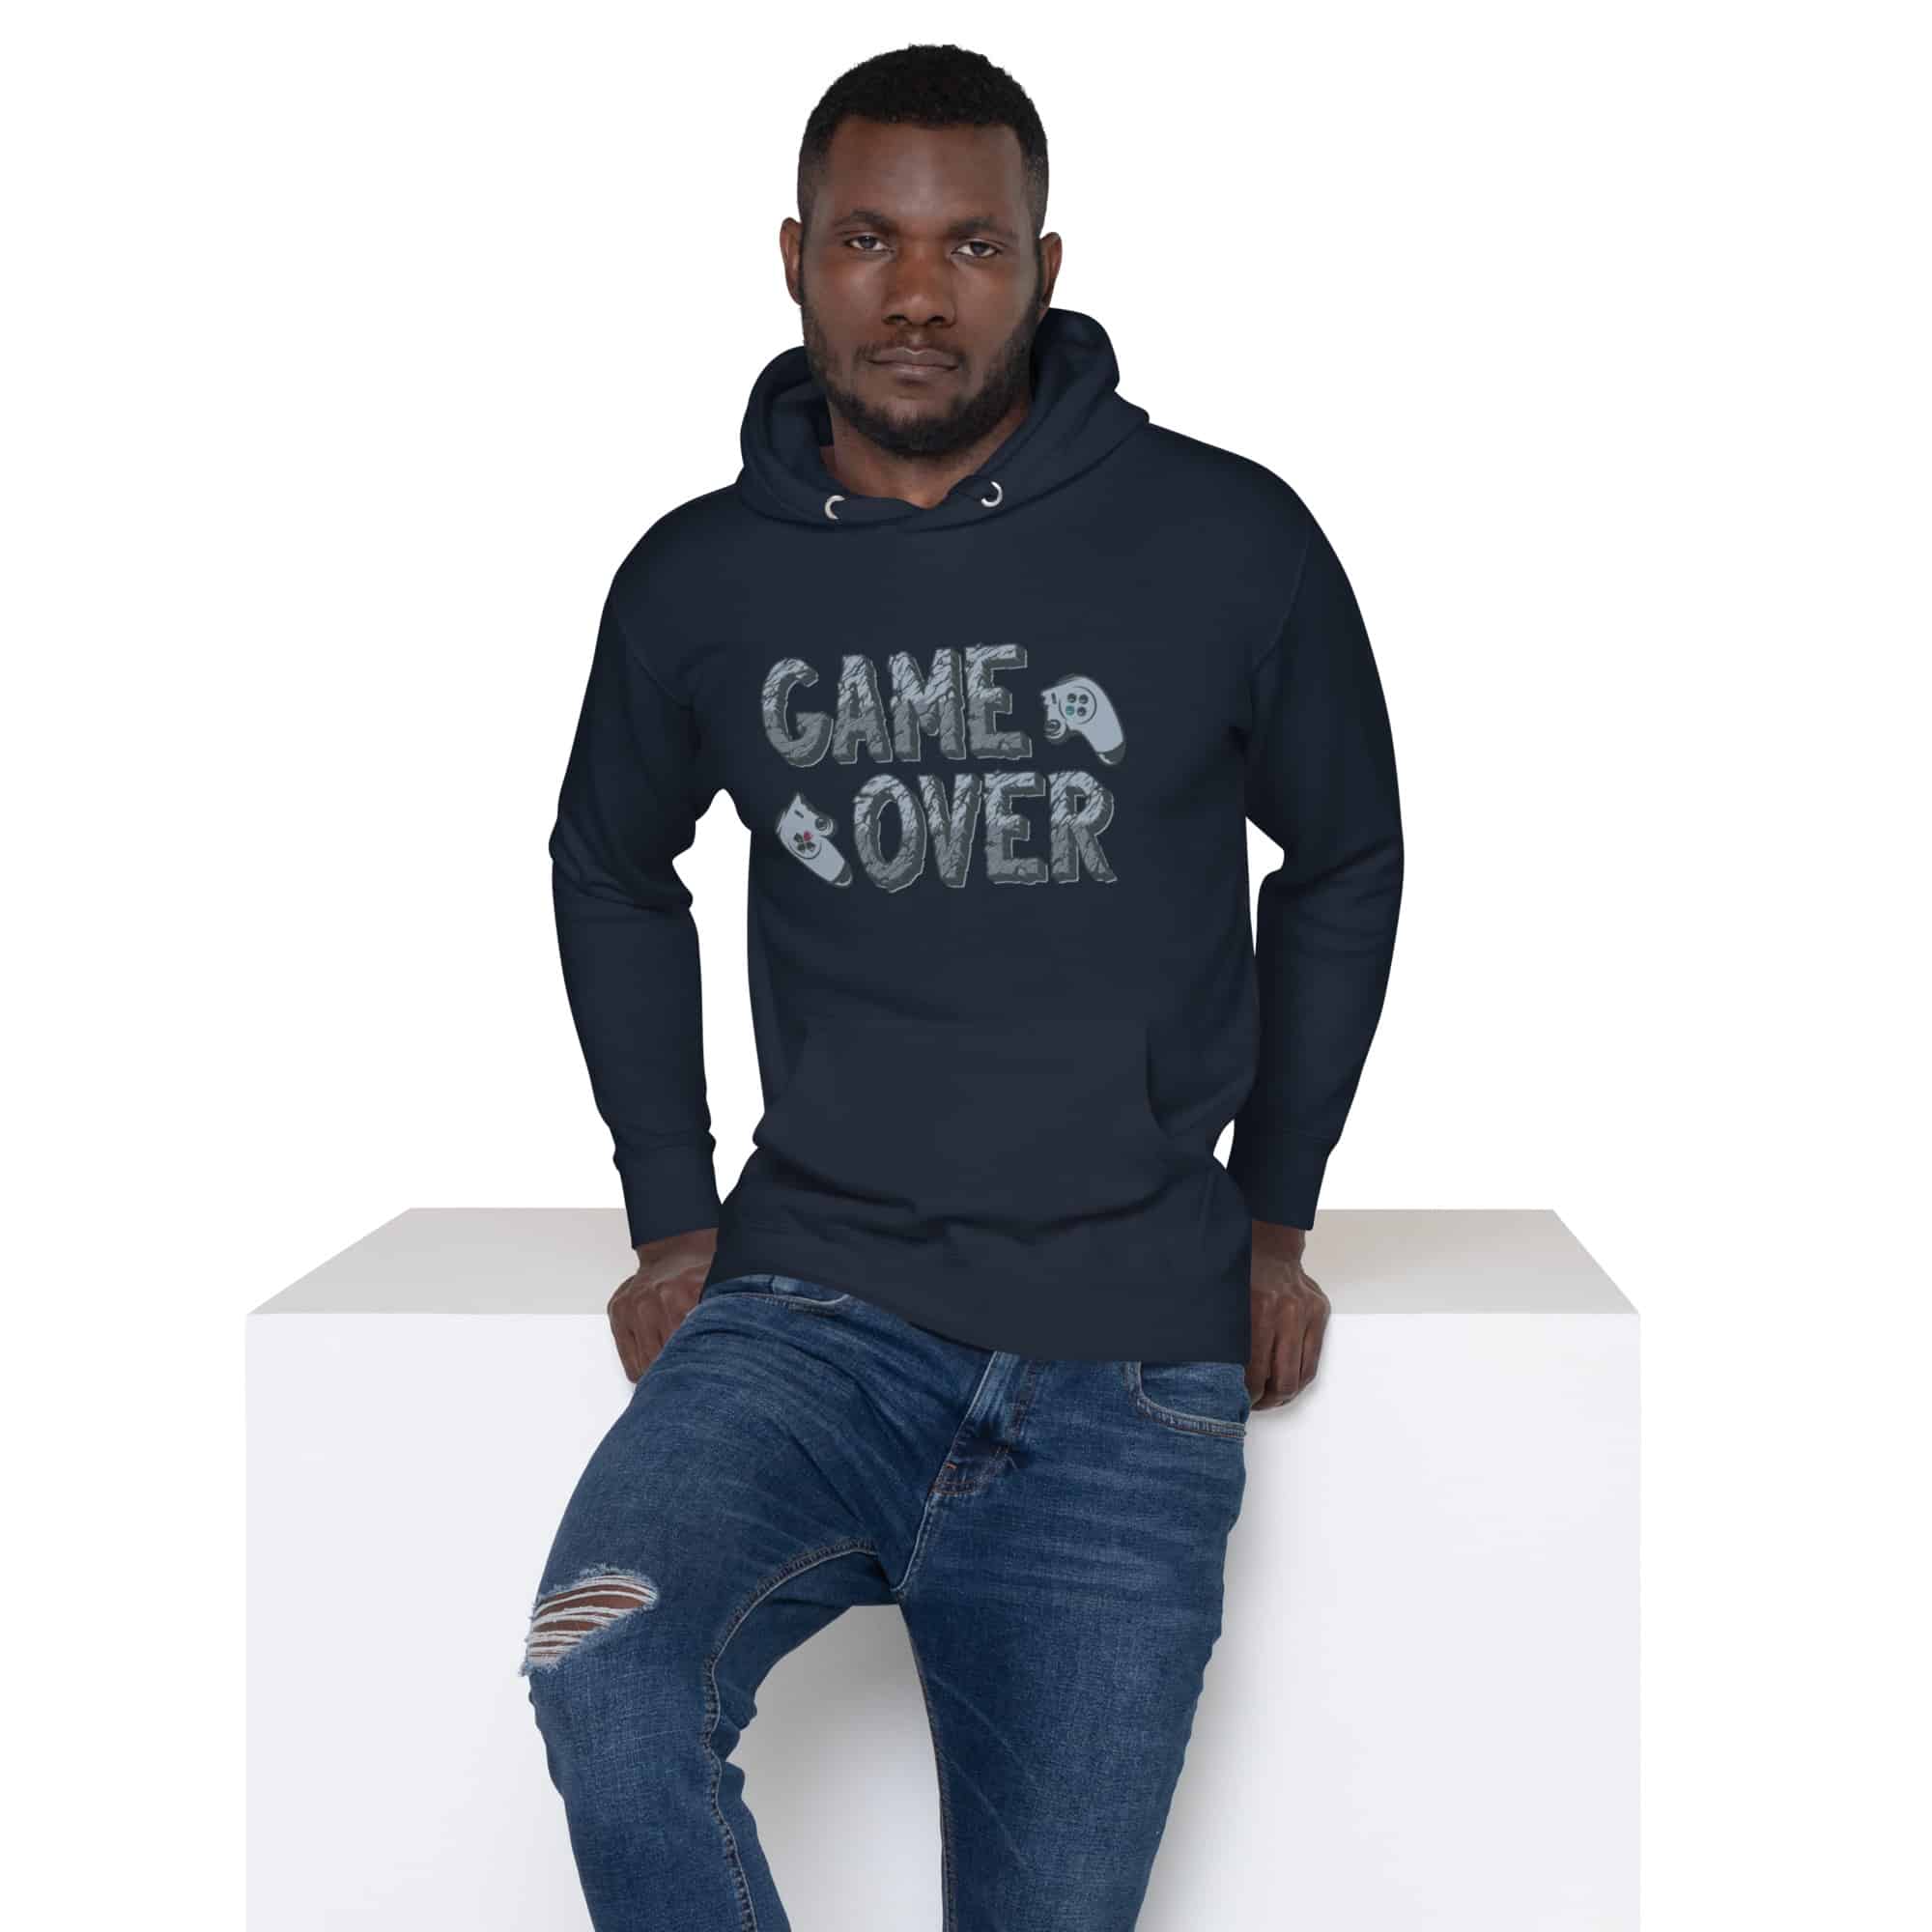 Game Over Unisex Hoodie Men's graphic t-shirts Women's graphic t-shirts Women's designer shirts Men's designer shirts Premium sweatshirts Unisex hoodies Premium hooded sweatshirts Designer sweatshirts High-quality sweatshirts Luxury sweatshirts Unisex fleece sweatshirts Premium pullover sweatshirts Unisex heavyweight sweatshirts Premium cotton sweatshirts Video game store Gaming merchandise Gaming accessories shop Online gaming store Video game shop near me Gaming console store PC gaming store Gaming gear shop Retro gaming shop Board game shop Anime merchandise Anime store online Japanese anime shop Anime figurines Manga shop Anime DVDs Anime accessories Anime apparel Anime collectibles Anime gifts